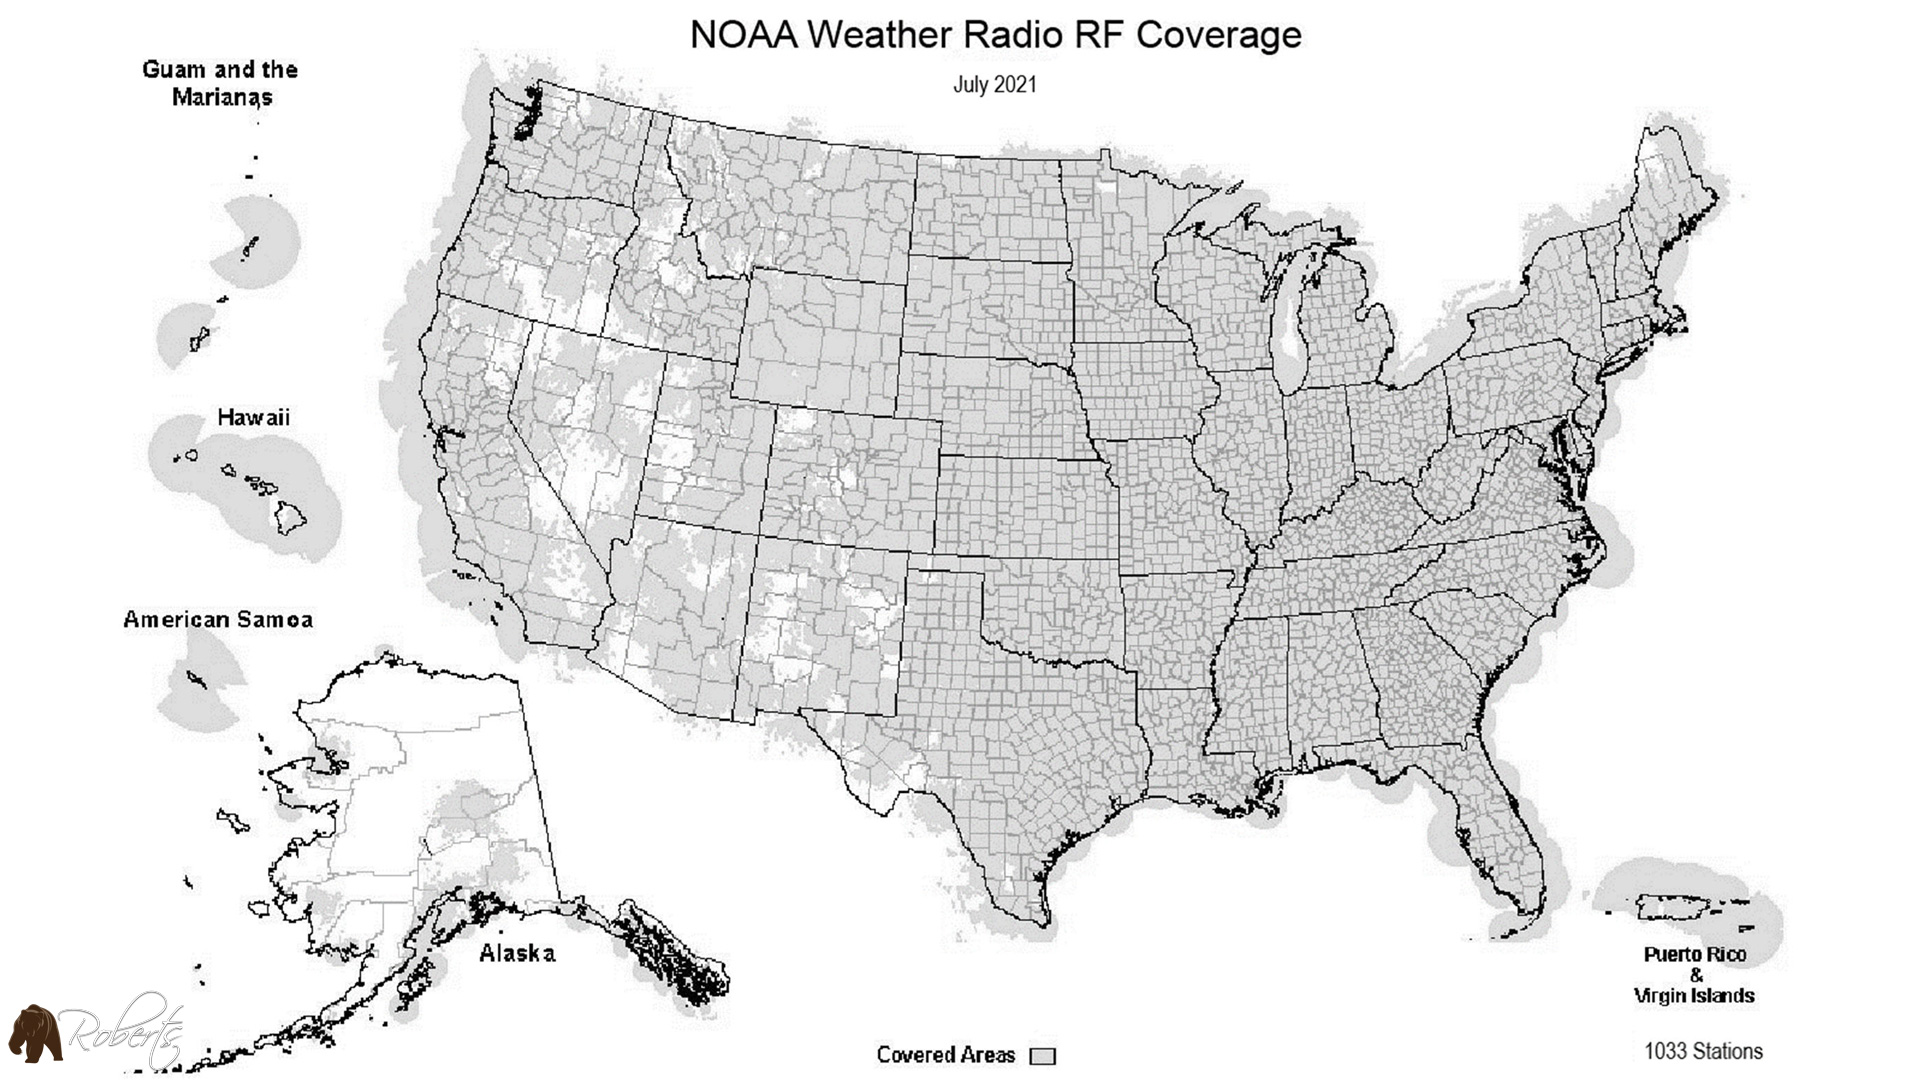 NOAA Weather Radio Frequencies and Coverage